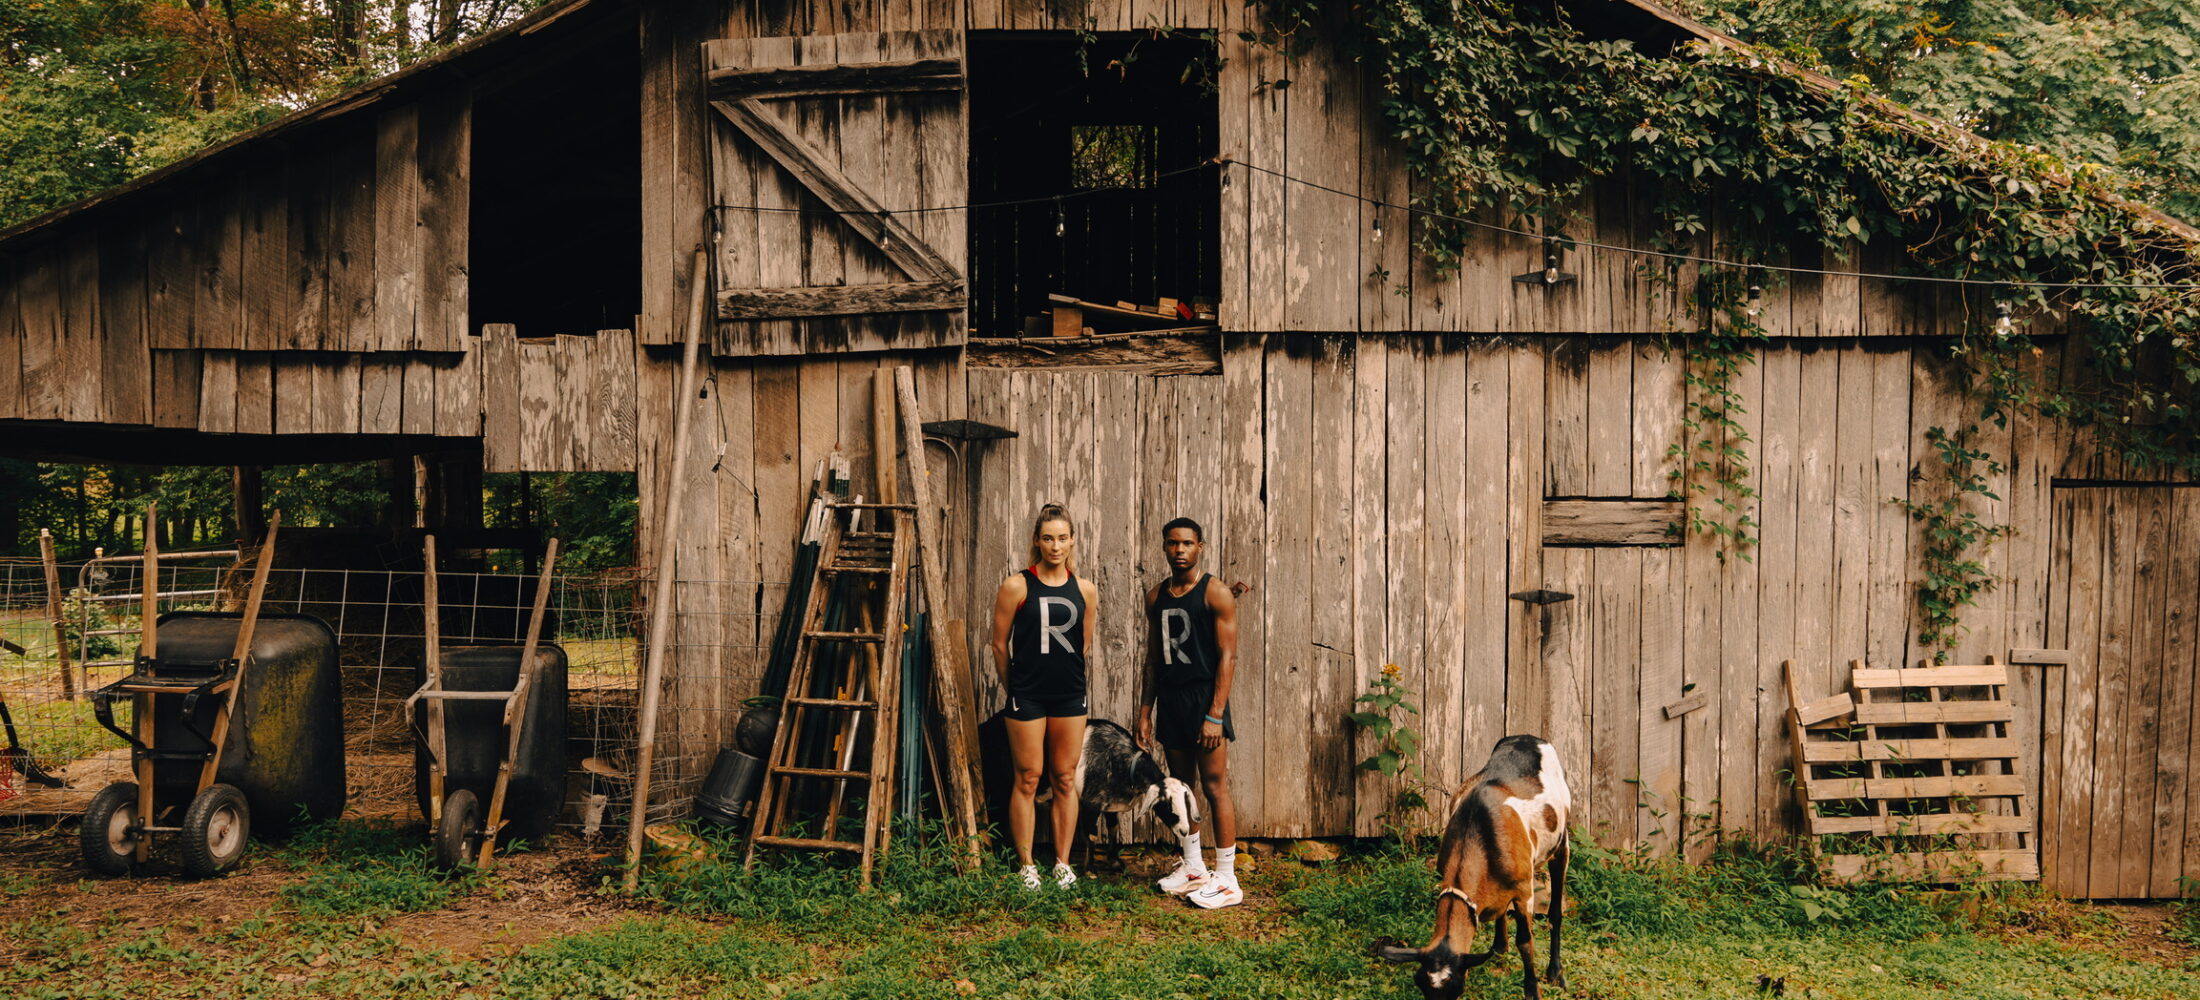 Two runners and a goat standing in front of a run down barn